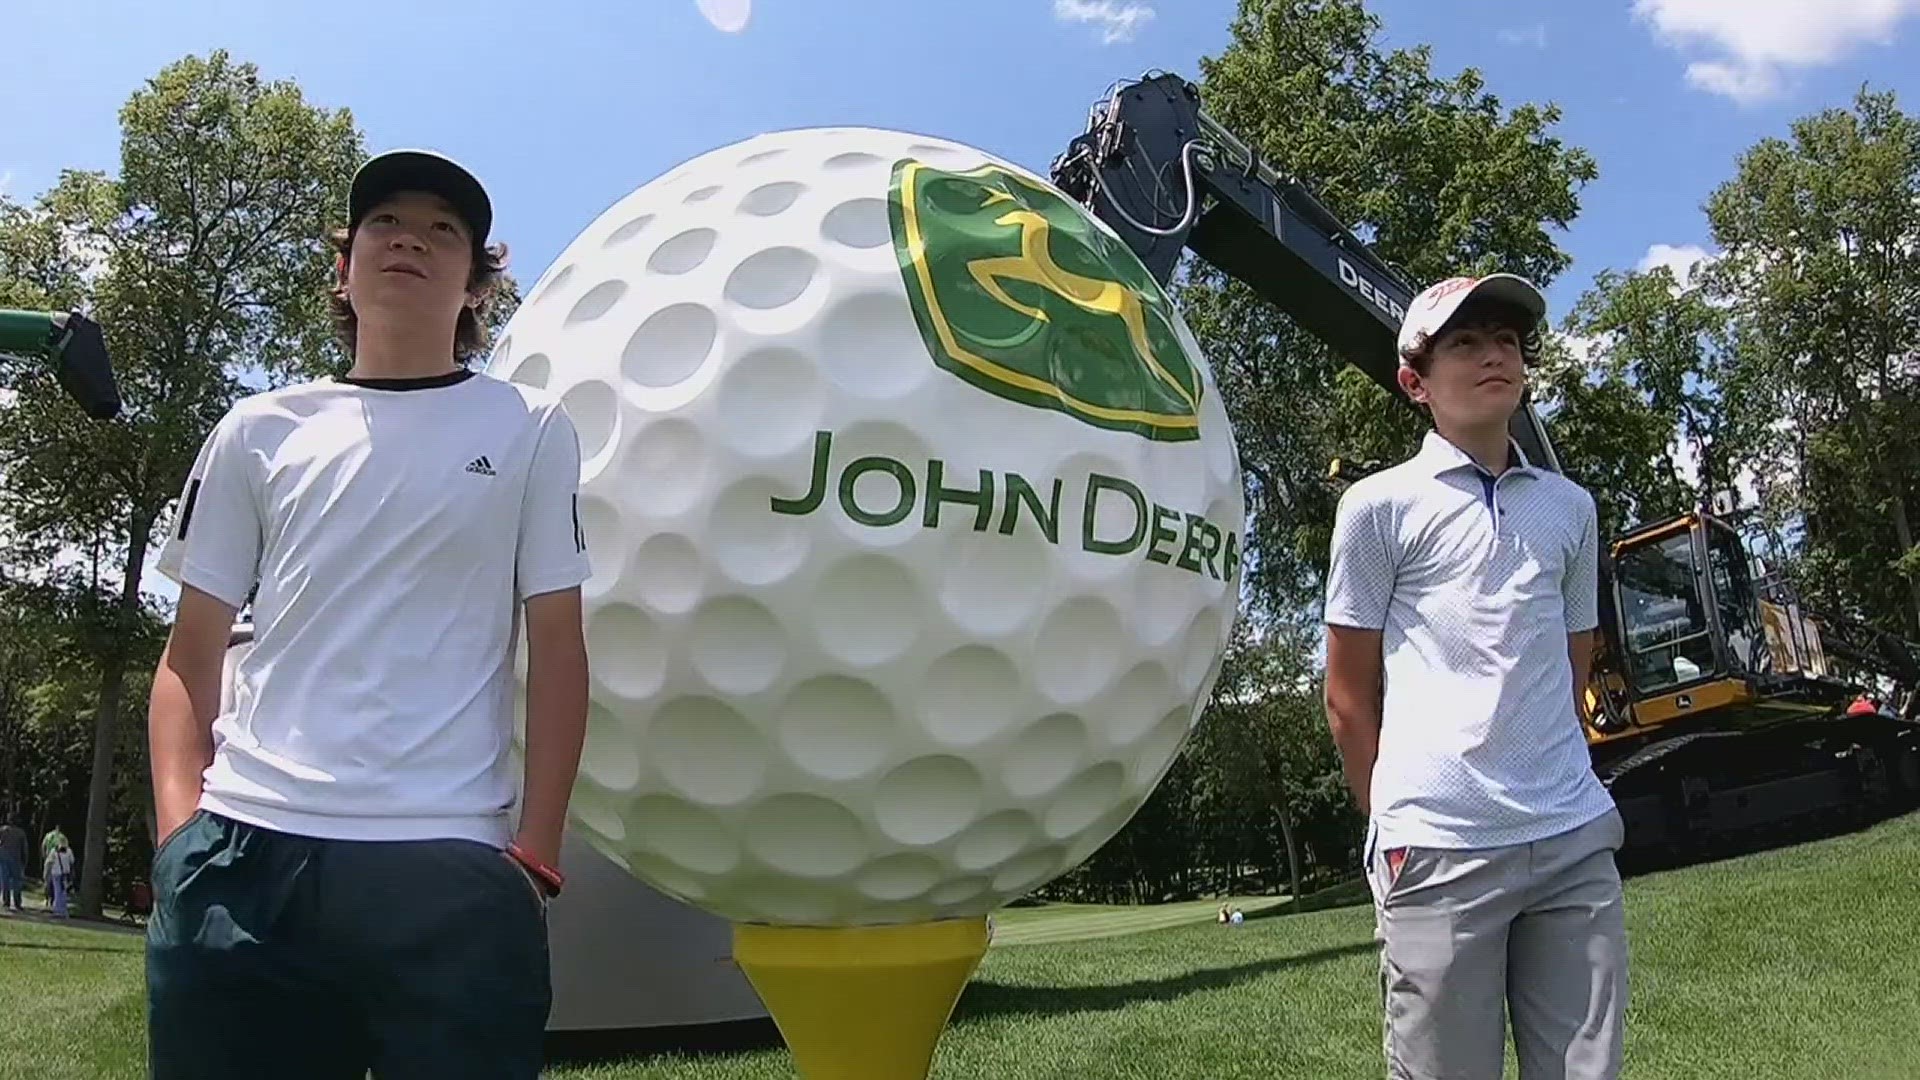 Thousands of fans went out to TPC Deere Run for the golf and festivities.